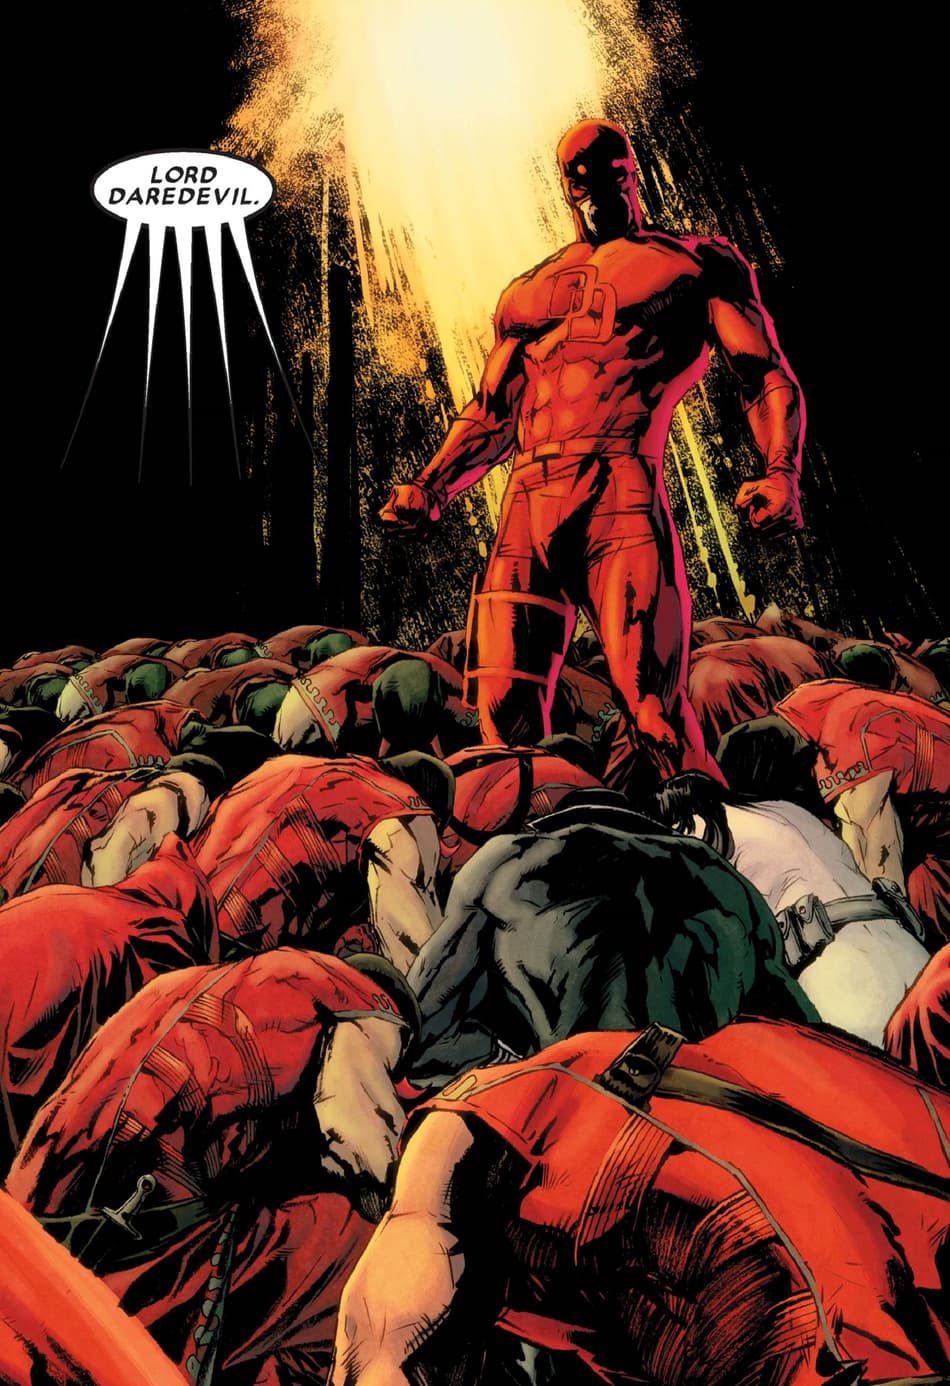 DAREDEVIL (1998) #501: Daredevil takes over as the leader of The Hand.